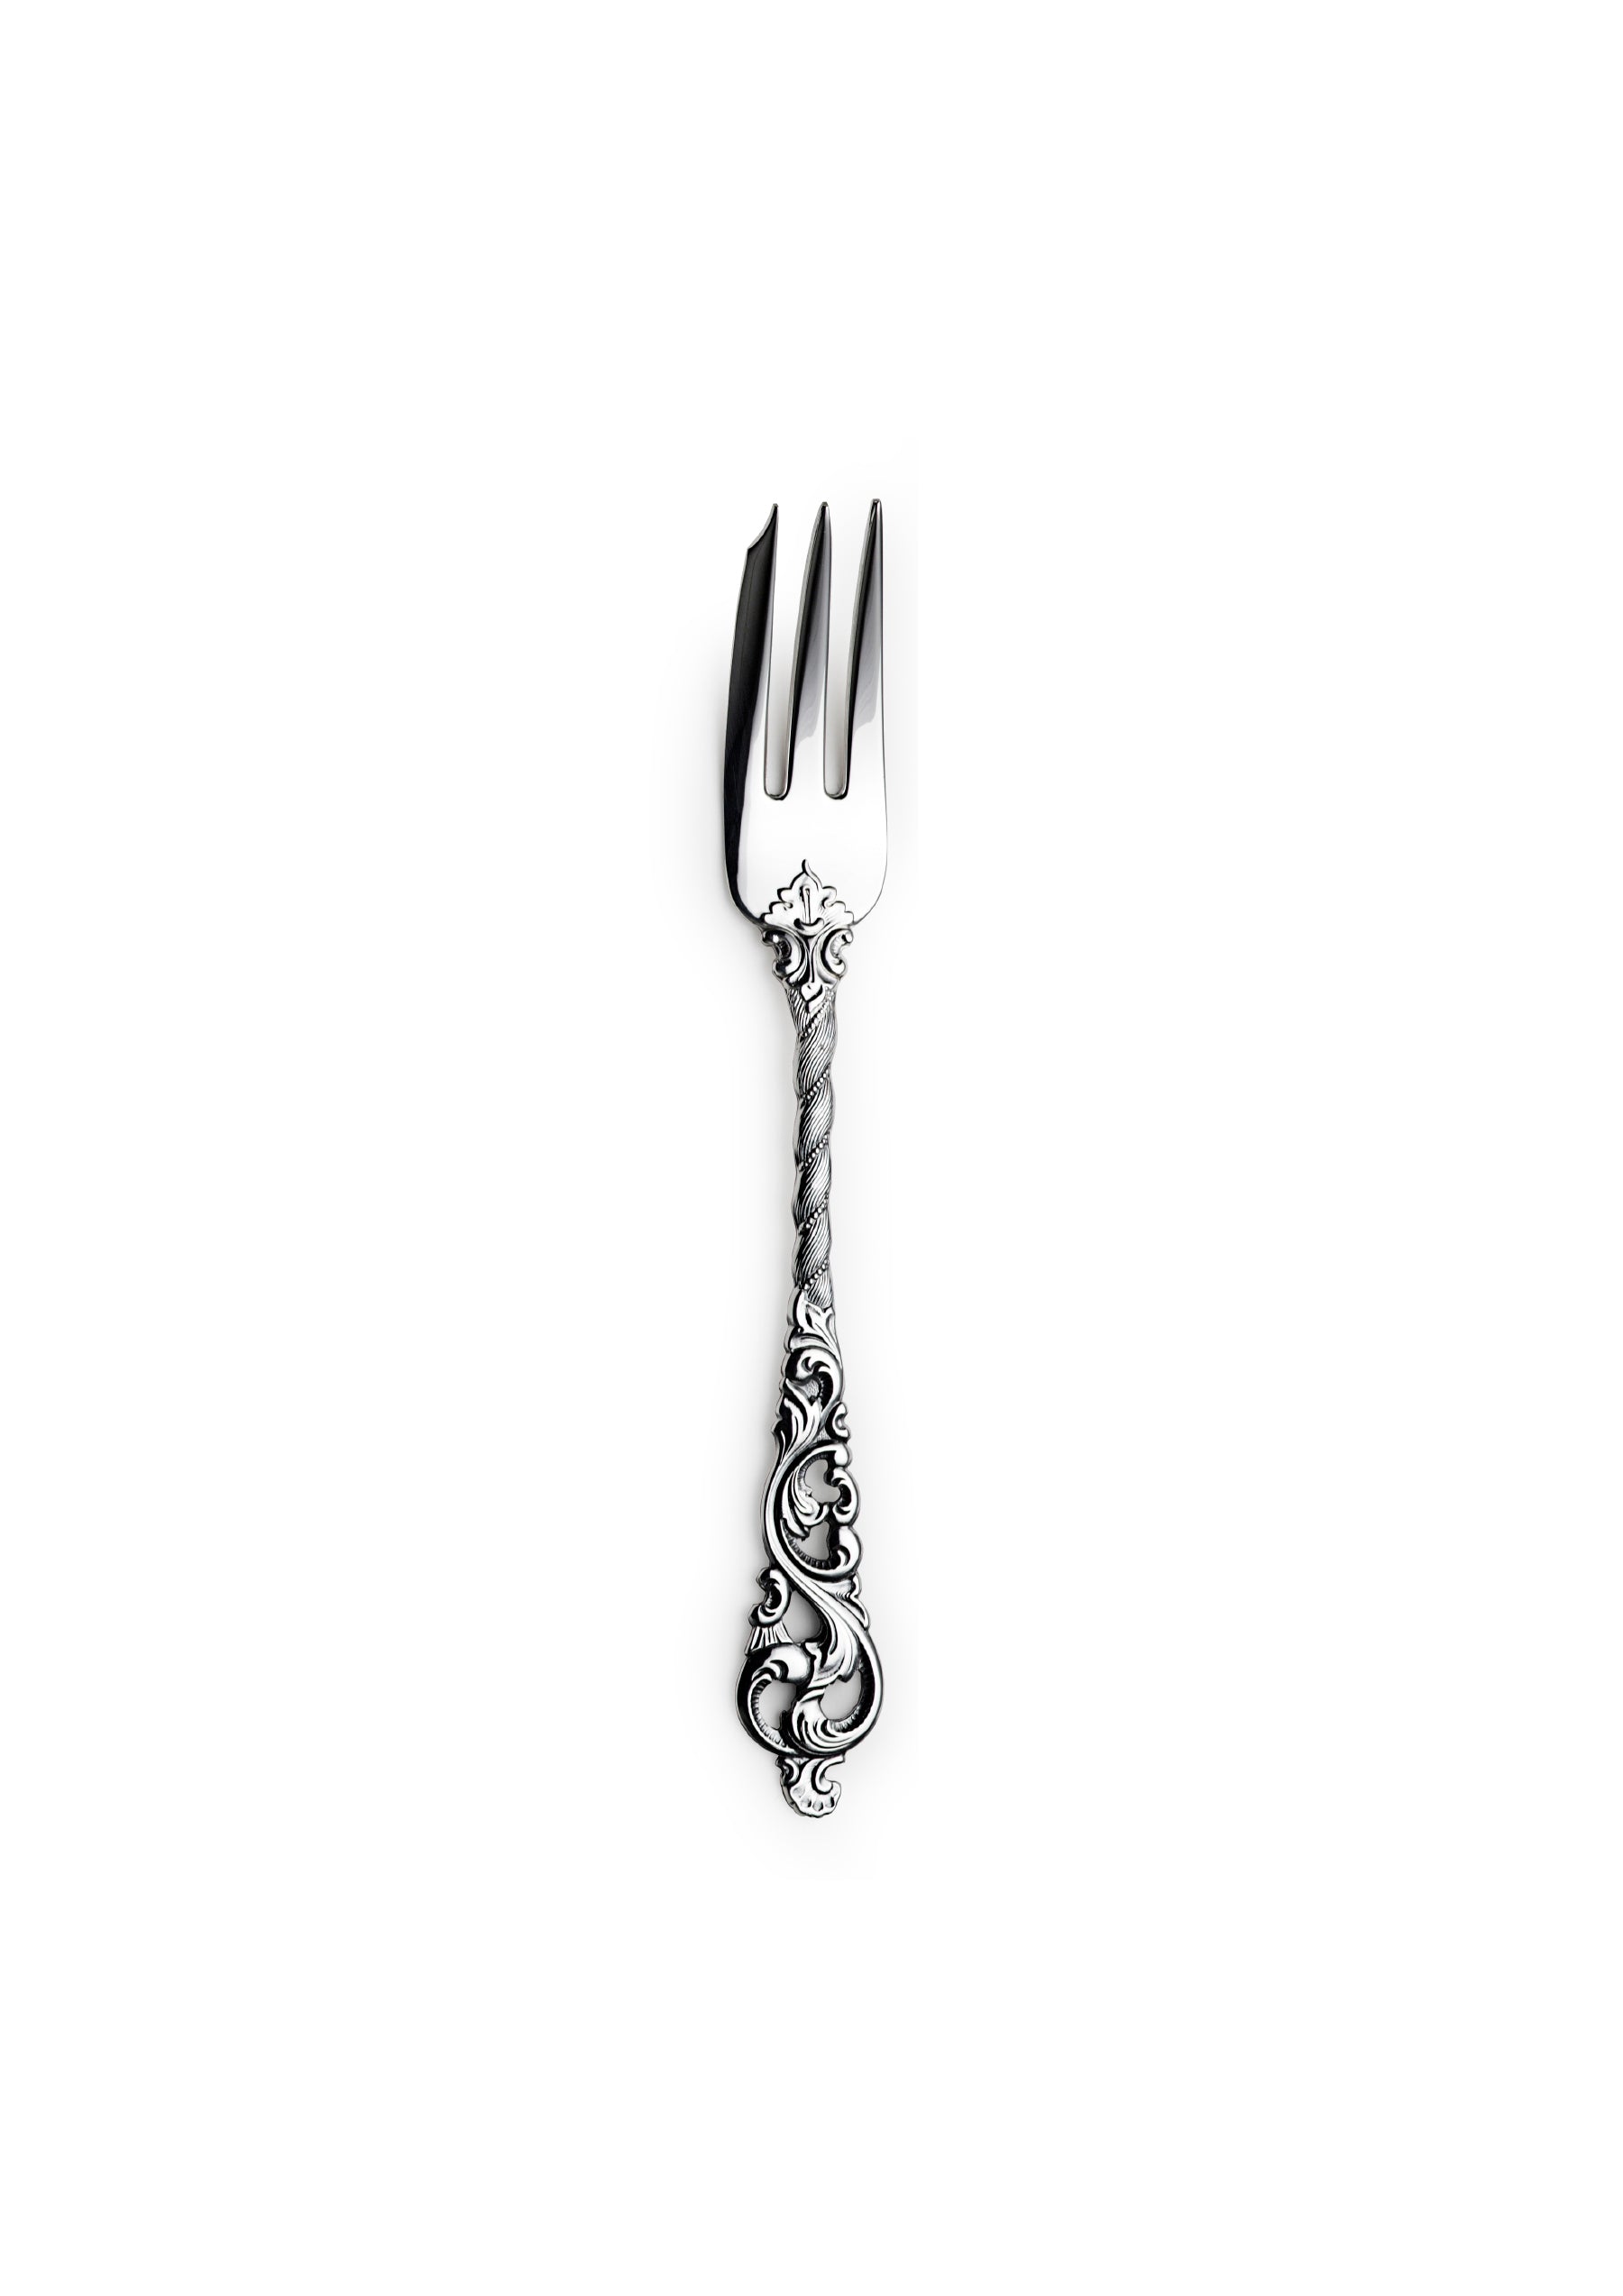 Double rococo cake fork